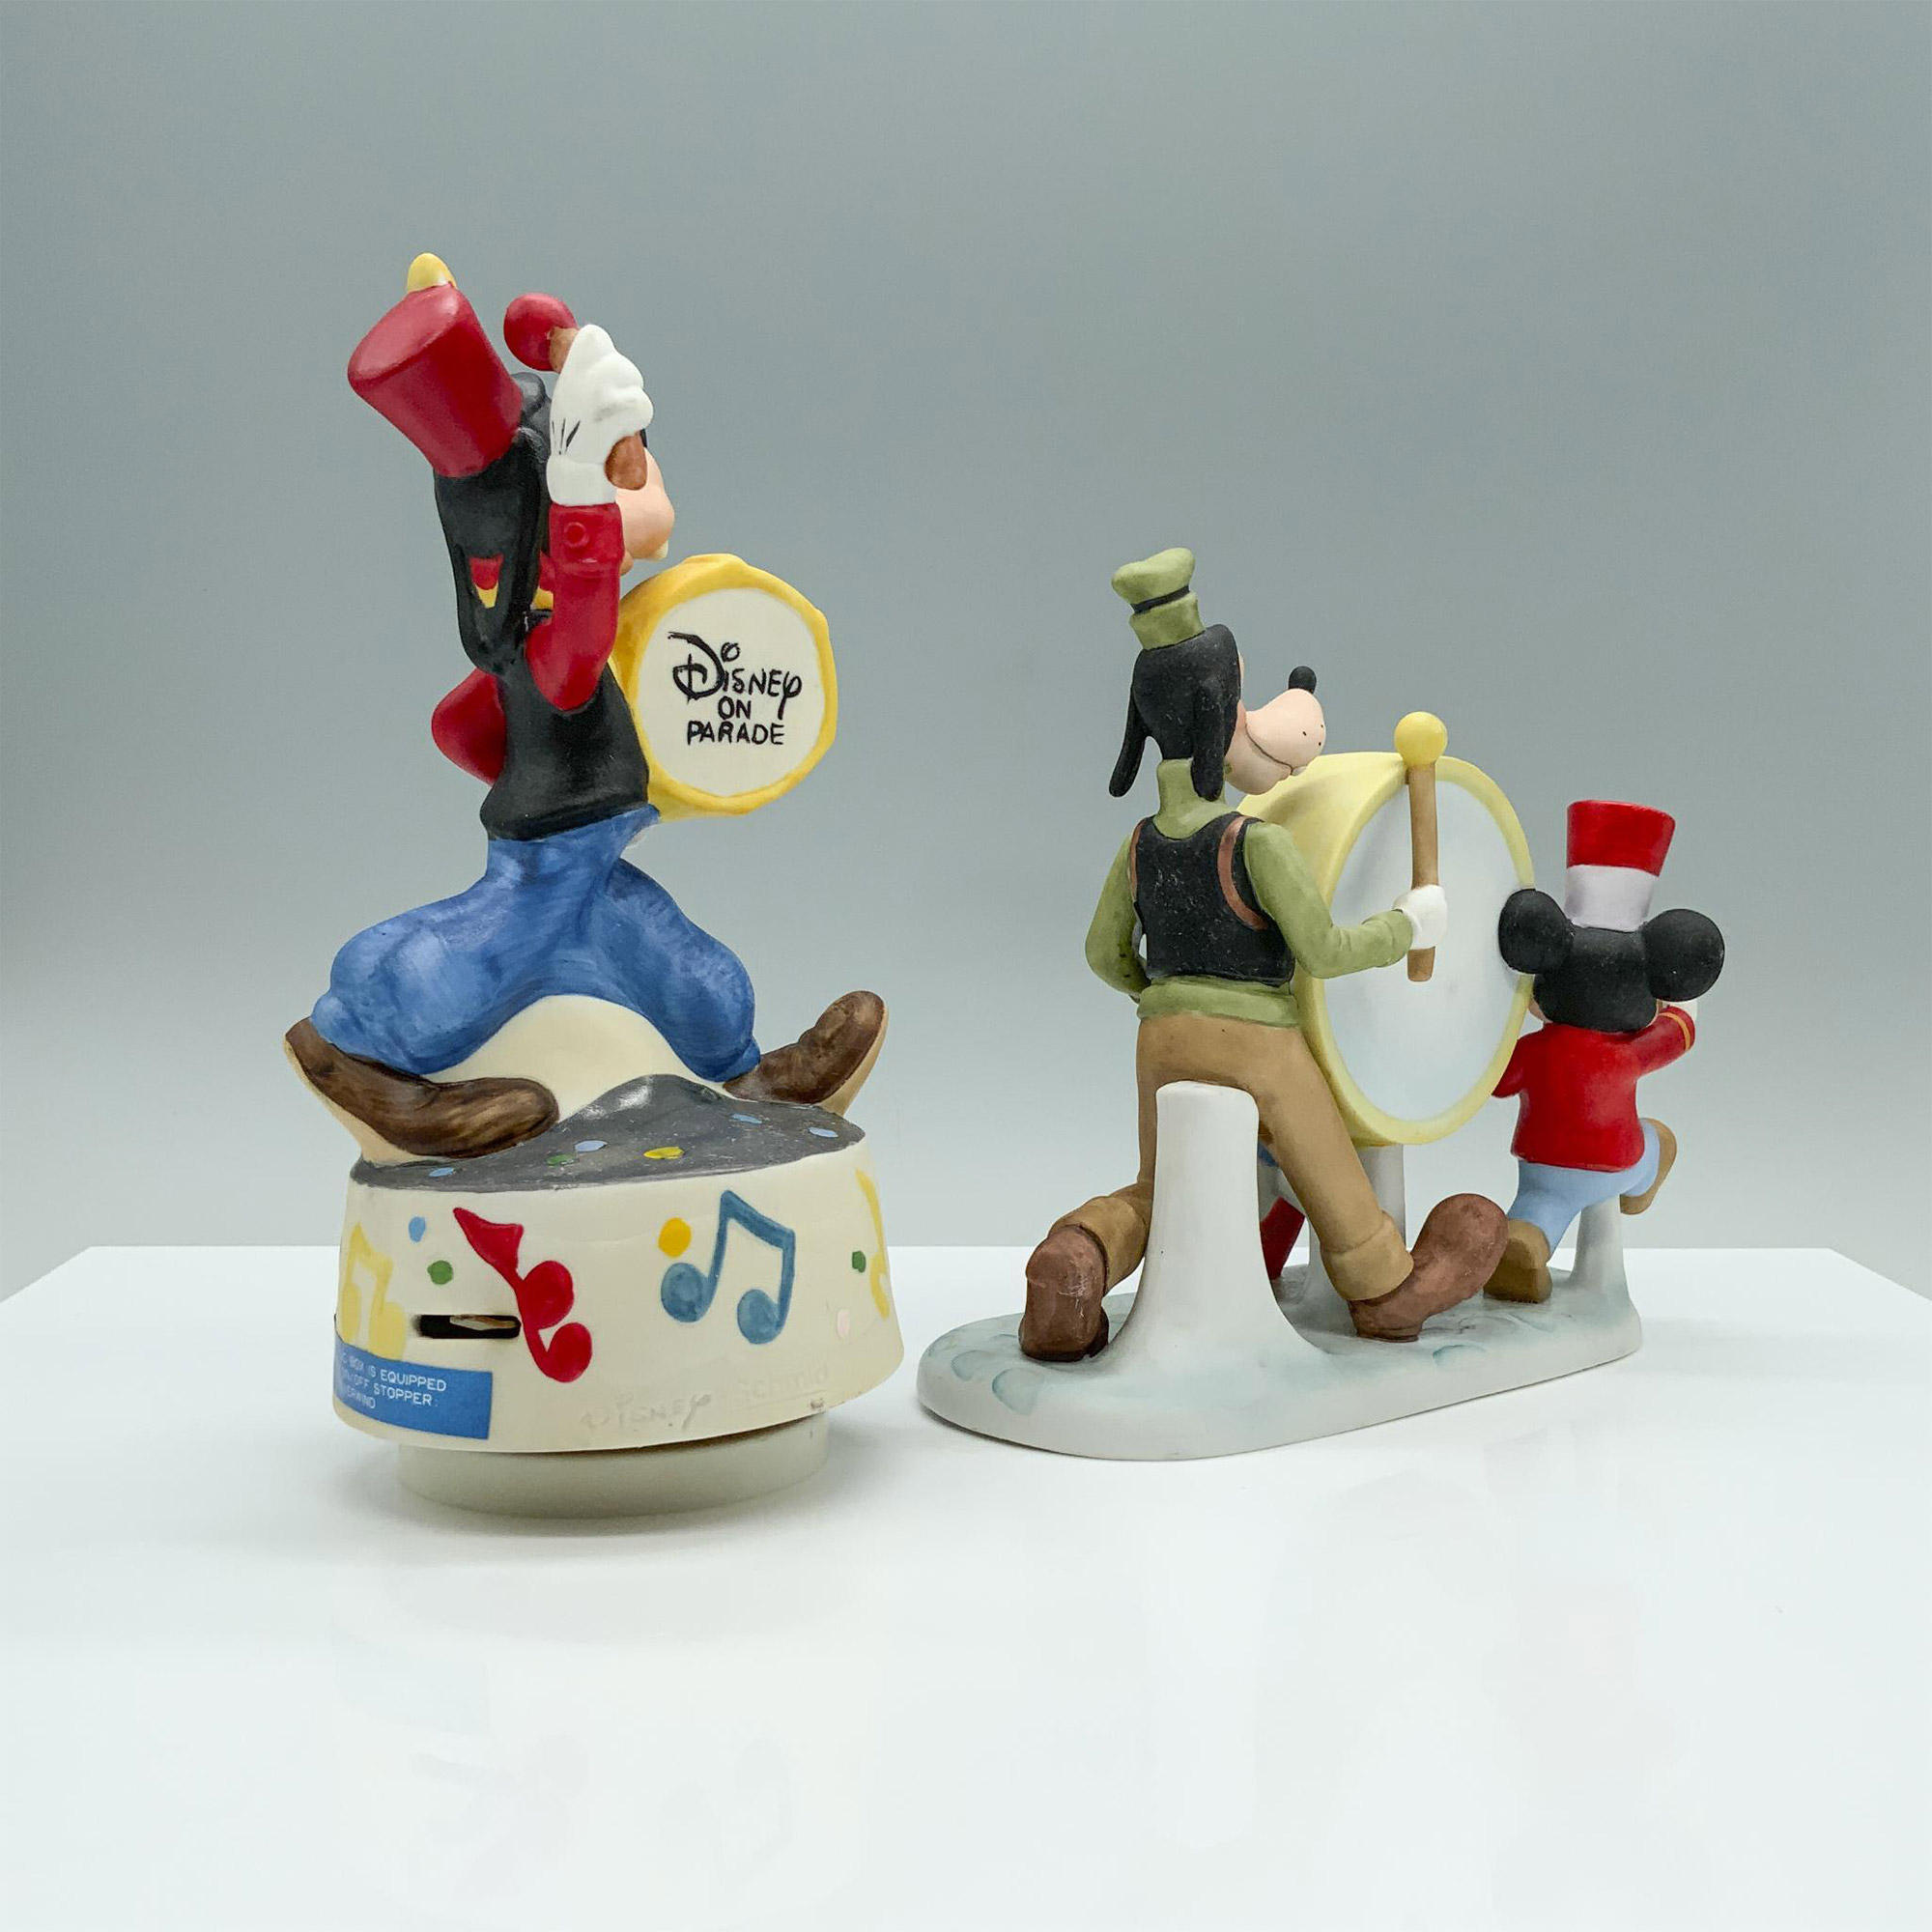 Disney Marching Band Goofy Motif Figurine and Music Box - Image 2 of 3